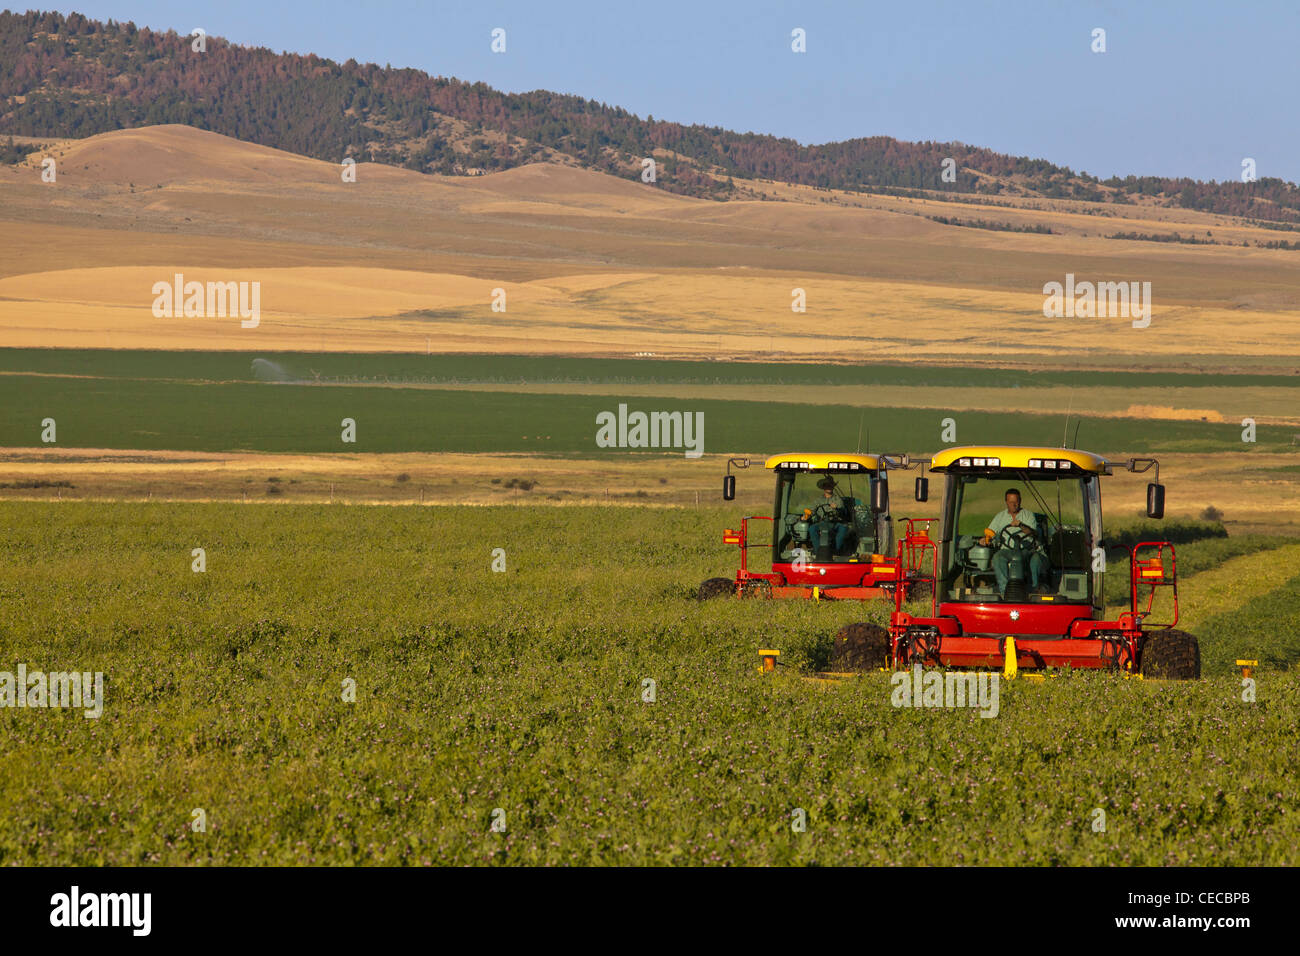 New Holland Durabine forage swathers cut austrain winter peas and oats at the Galt Ranch, Montana, USA Stock Photo